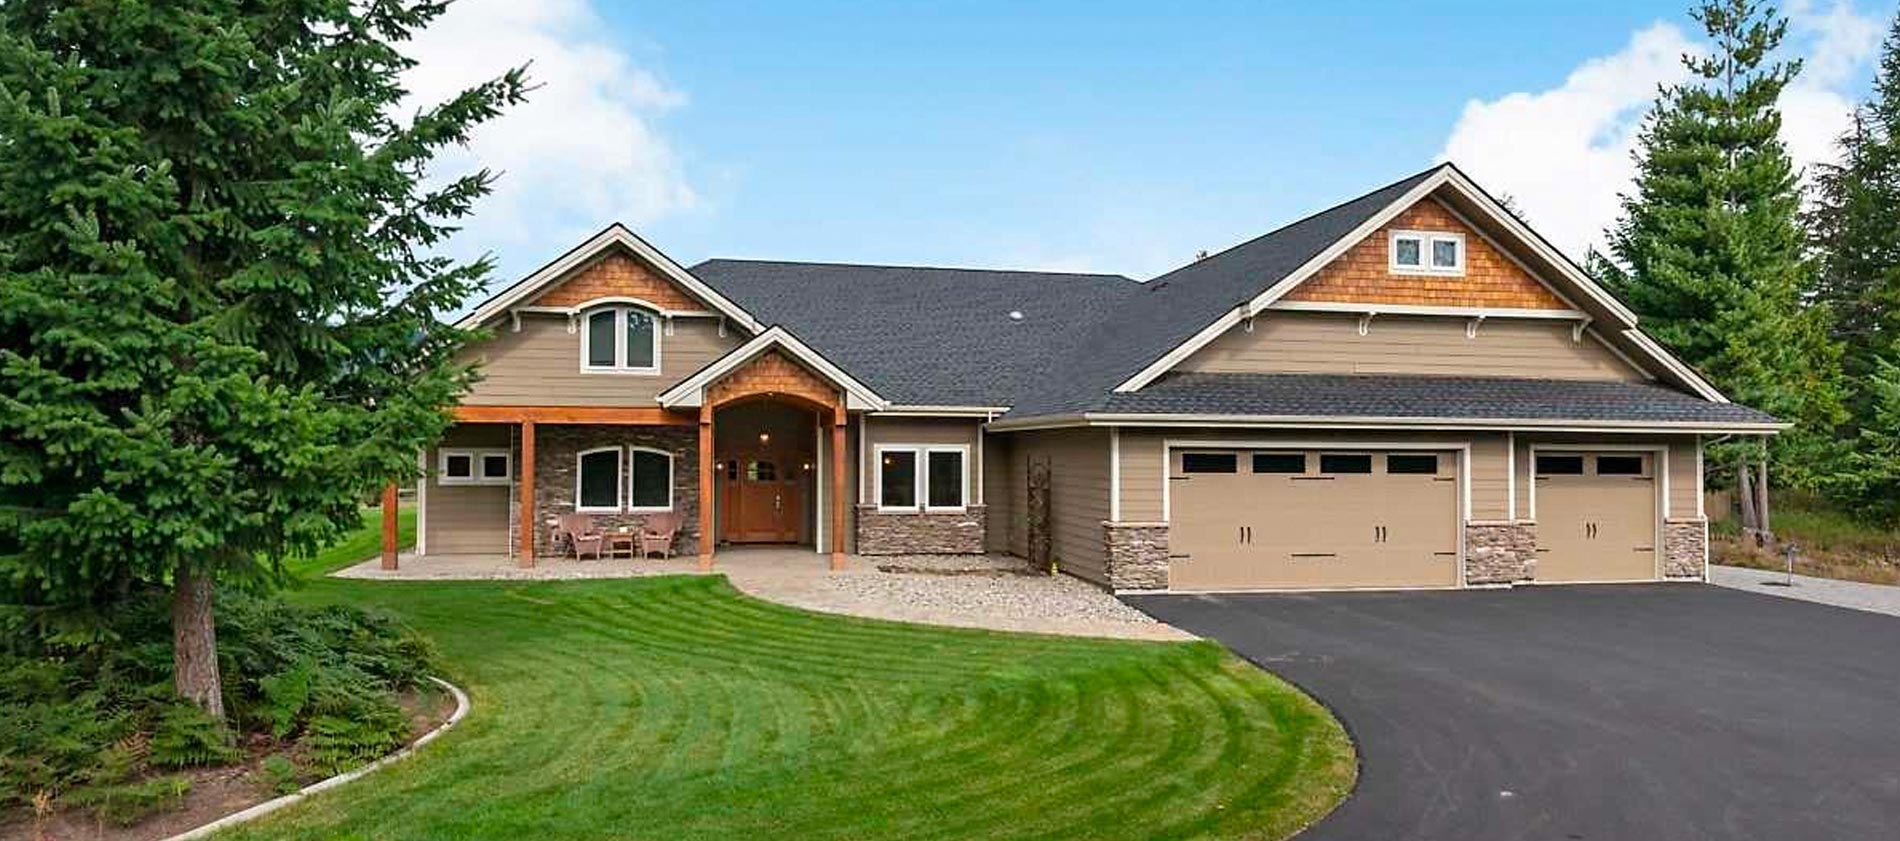 Home on 5 acres in Gated Community of Meadows at Fall Creek Naples, Idaho